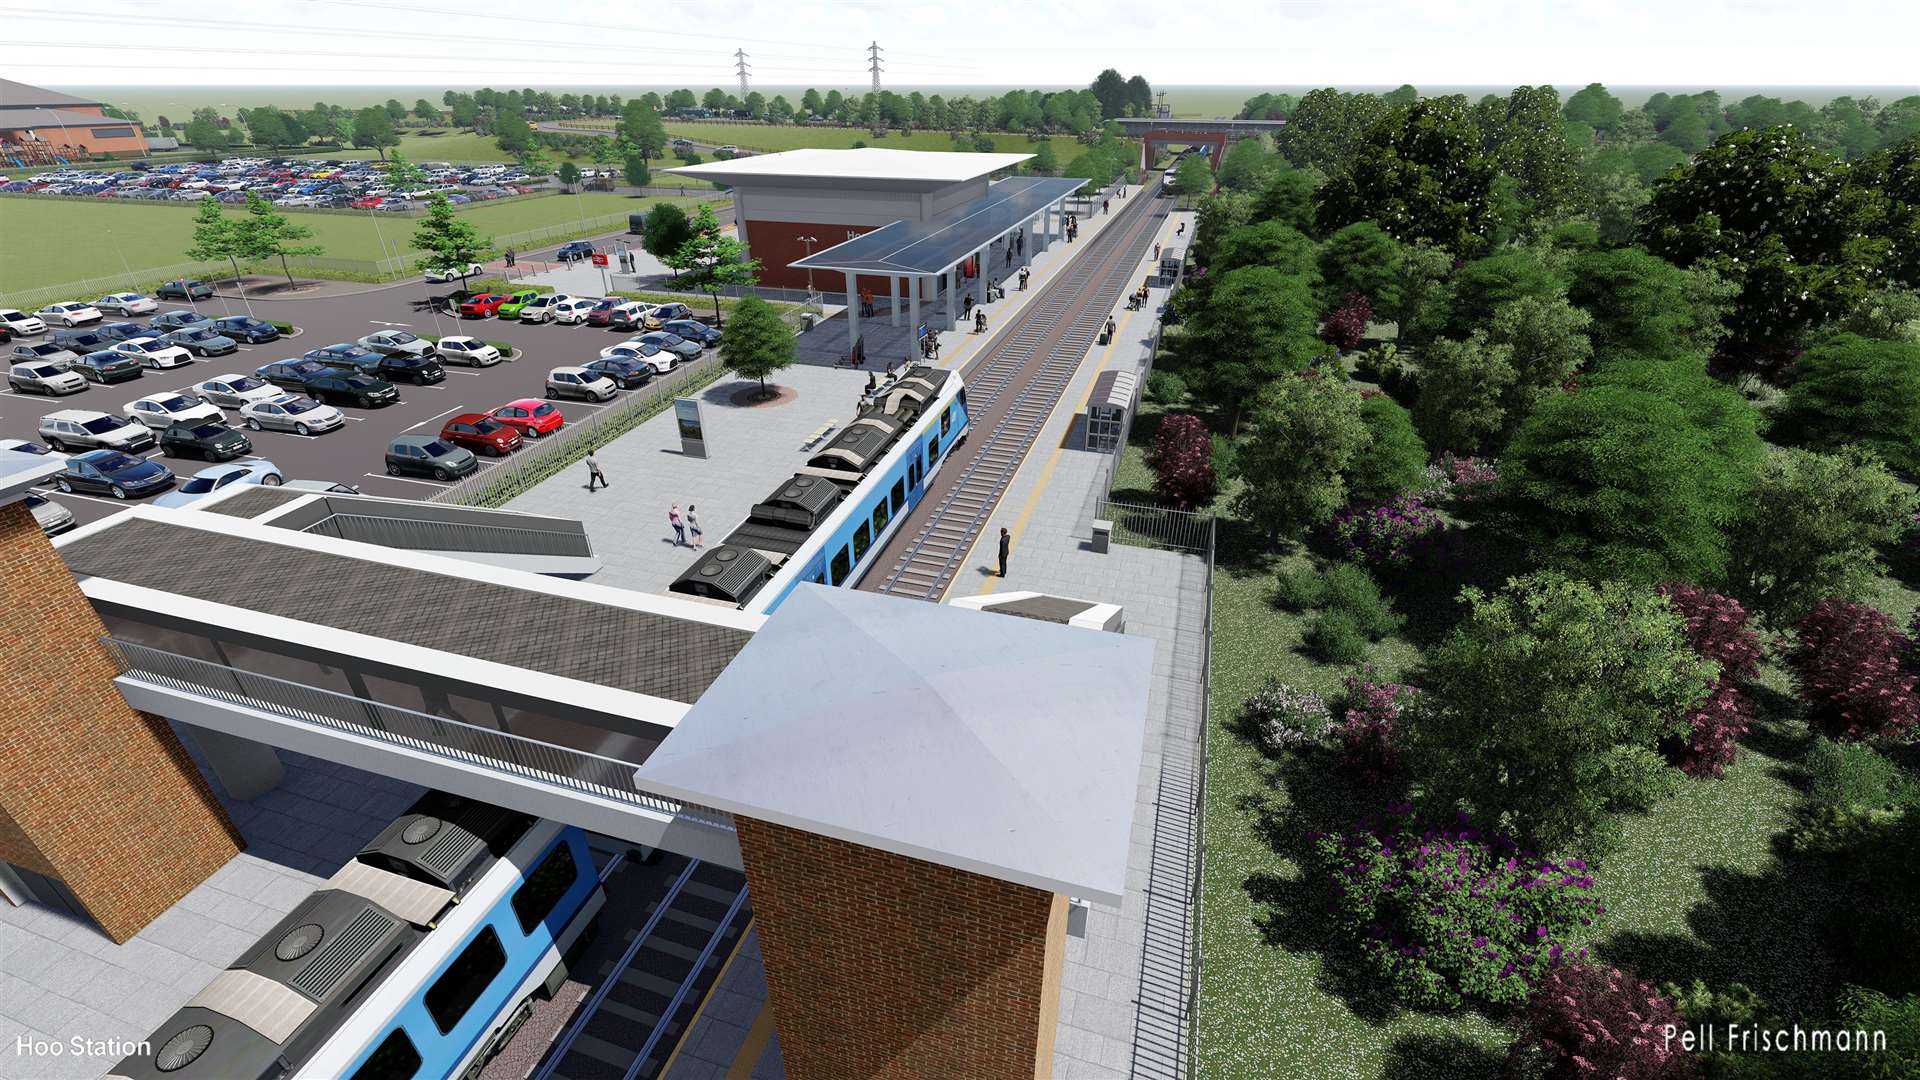 An artist's impression of the new station proposed for the Hoo Peninsula